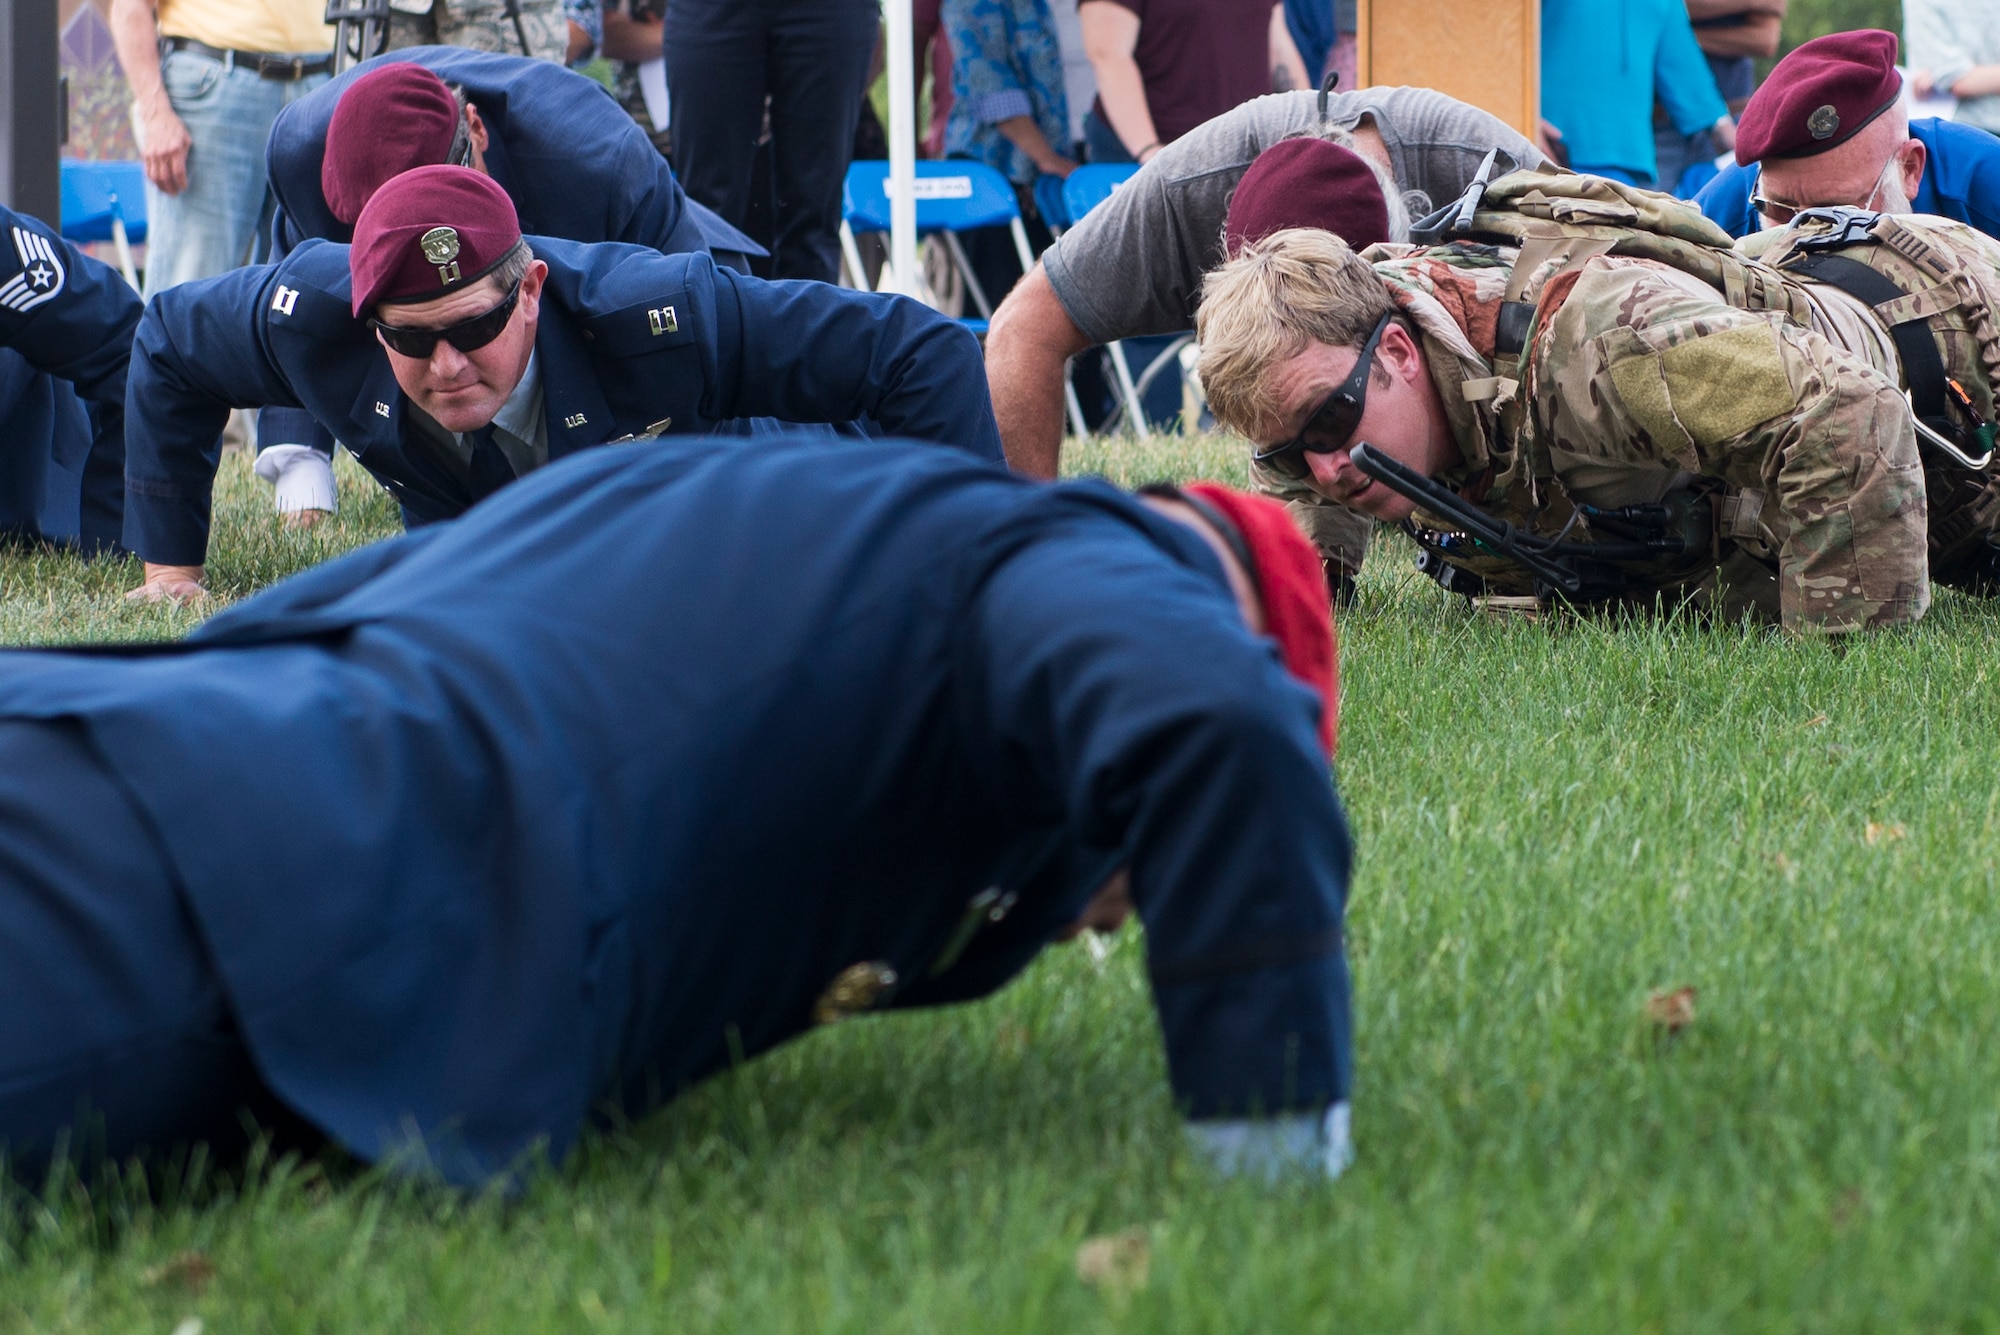 Col. Michael Martin, commander of the 24th Special Operations Wing, leads memorial push-ups following a ceremony dedicating a six-mile stretch of Highway 121 in honor Master Sgt. William L. McDaniel II's namesake, in Greenville, Ohio, Aug. 14, 2017. McDaniel was part of a joint, special operations team who were infiltrating an island in Southern Philippines when the MH-47 Chinook helicopter he was in crashed into the Sulu Sea Feb. 22, 2002. (U.S. Air Force photo by Wesley Farnsworth)